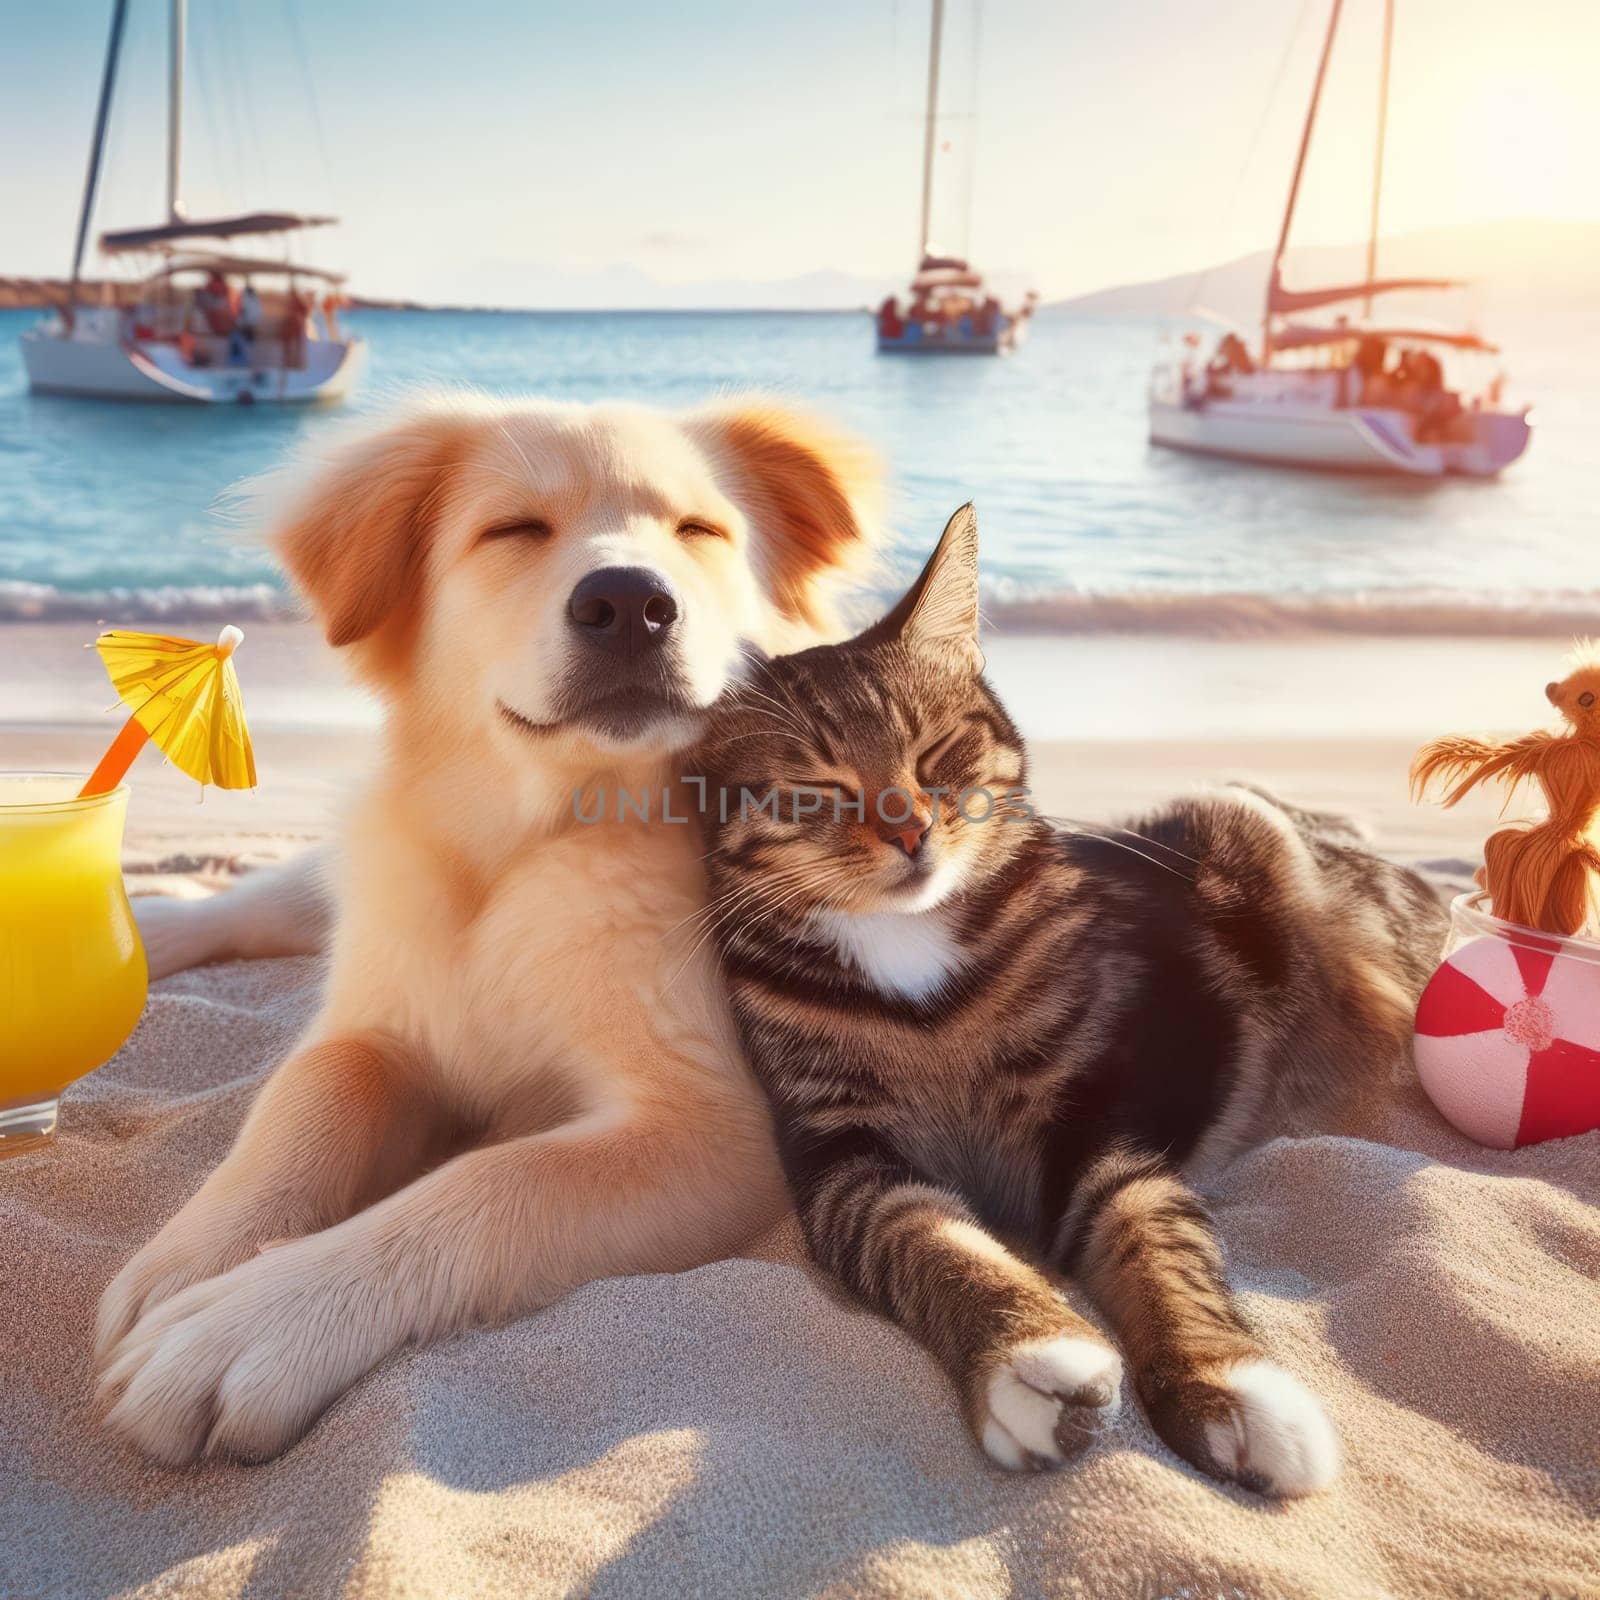 Happy cat and a dog relaxing on a beach with a cocktail and a beach ball, with a beautiful ocean view and boats in the background